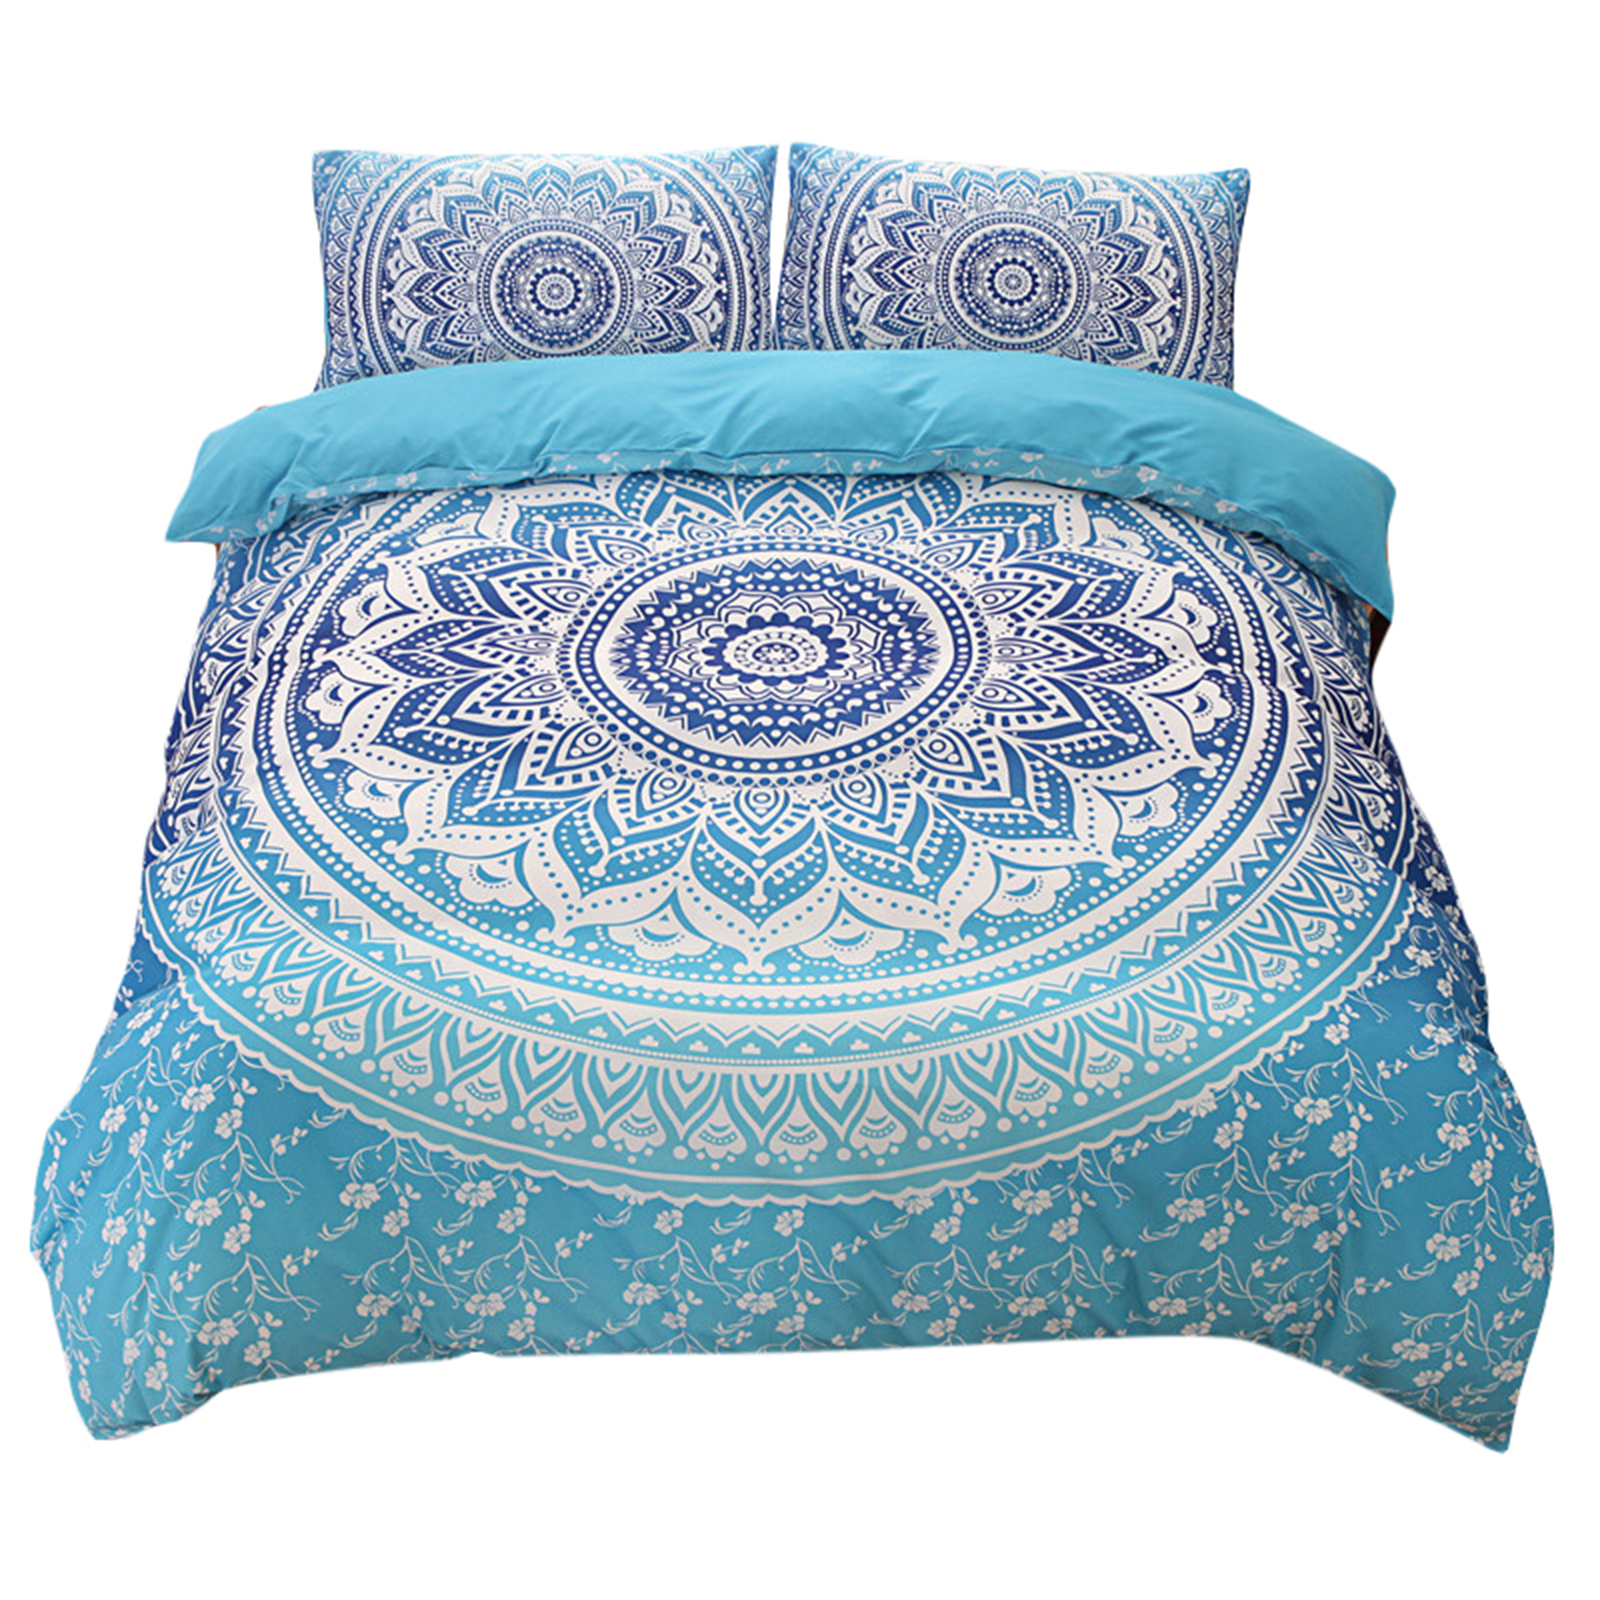 3 Piece Home Duvet Covers Set With 2 Pillow Cases Ultra Soft Breathable Mandala Pattern All Season Bedding Set